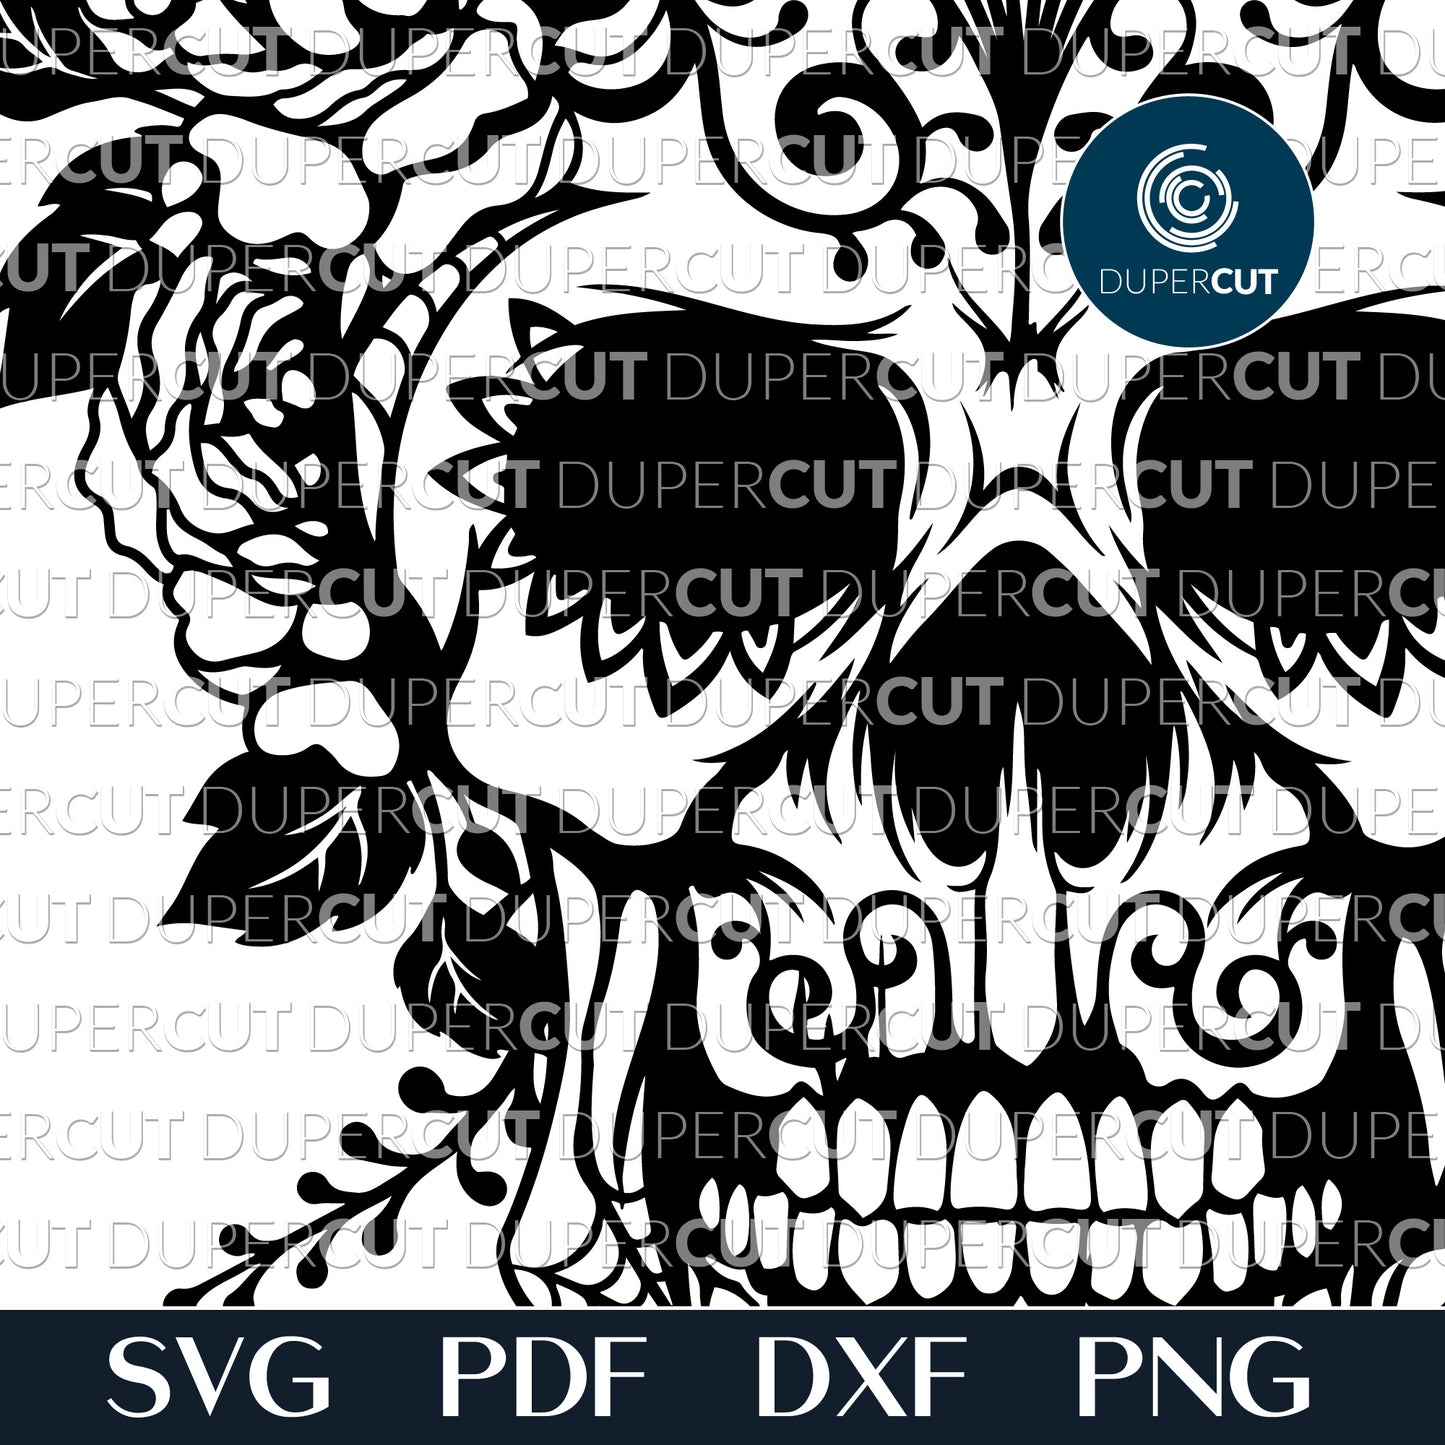 Gothic Sugar Skull with roses - SVG DXF PNG laser cutting and engraving files for Cricut, Silhouette Cameo, Glowforge by DuperCut